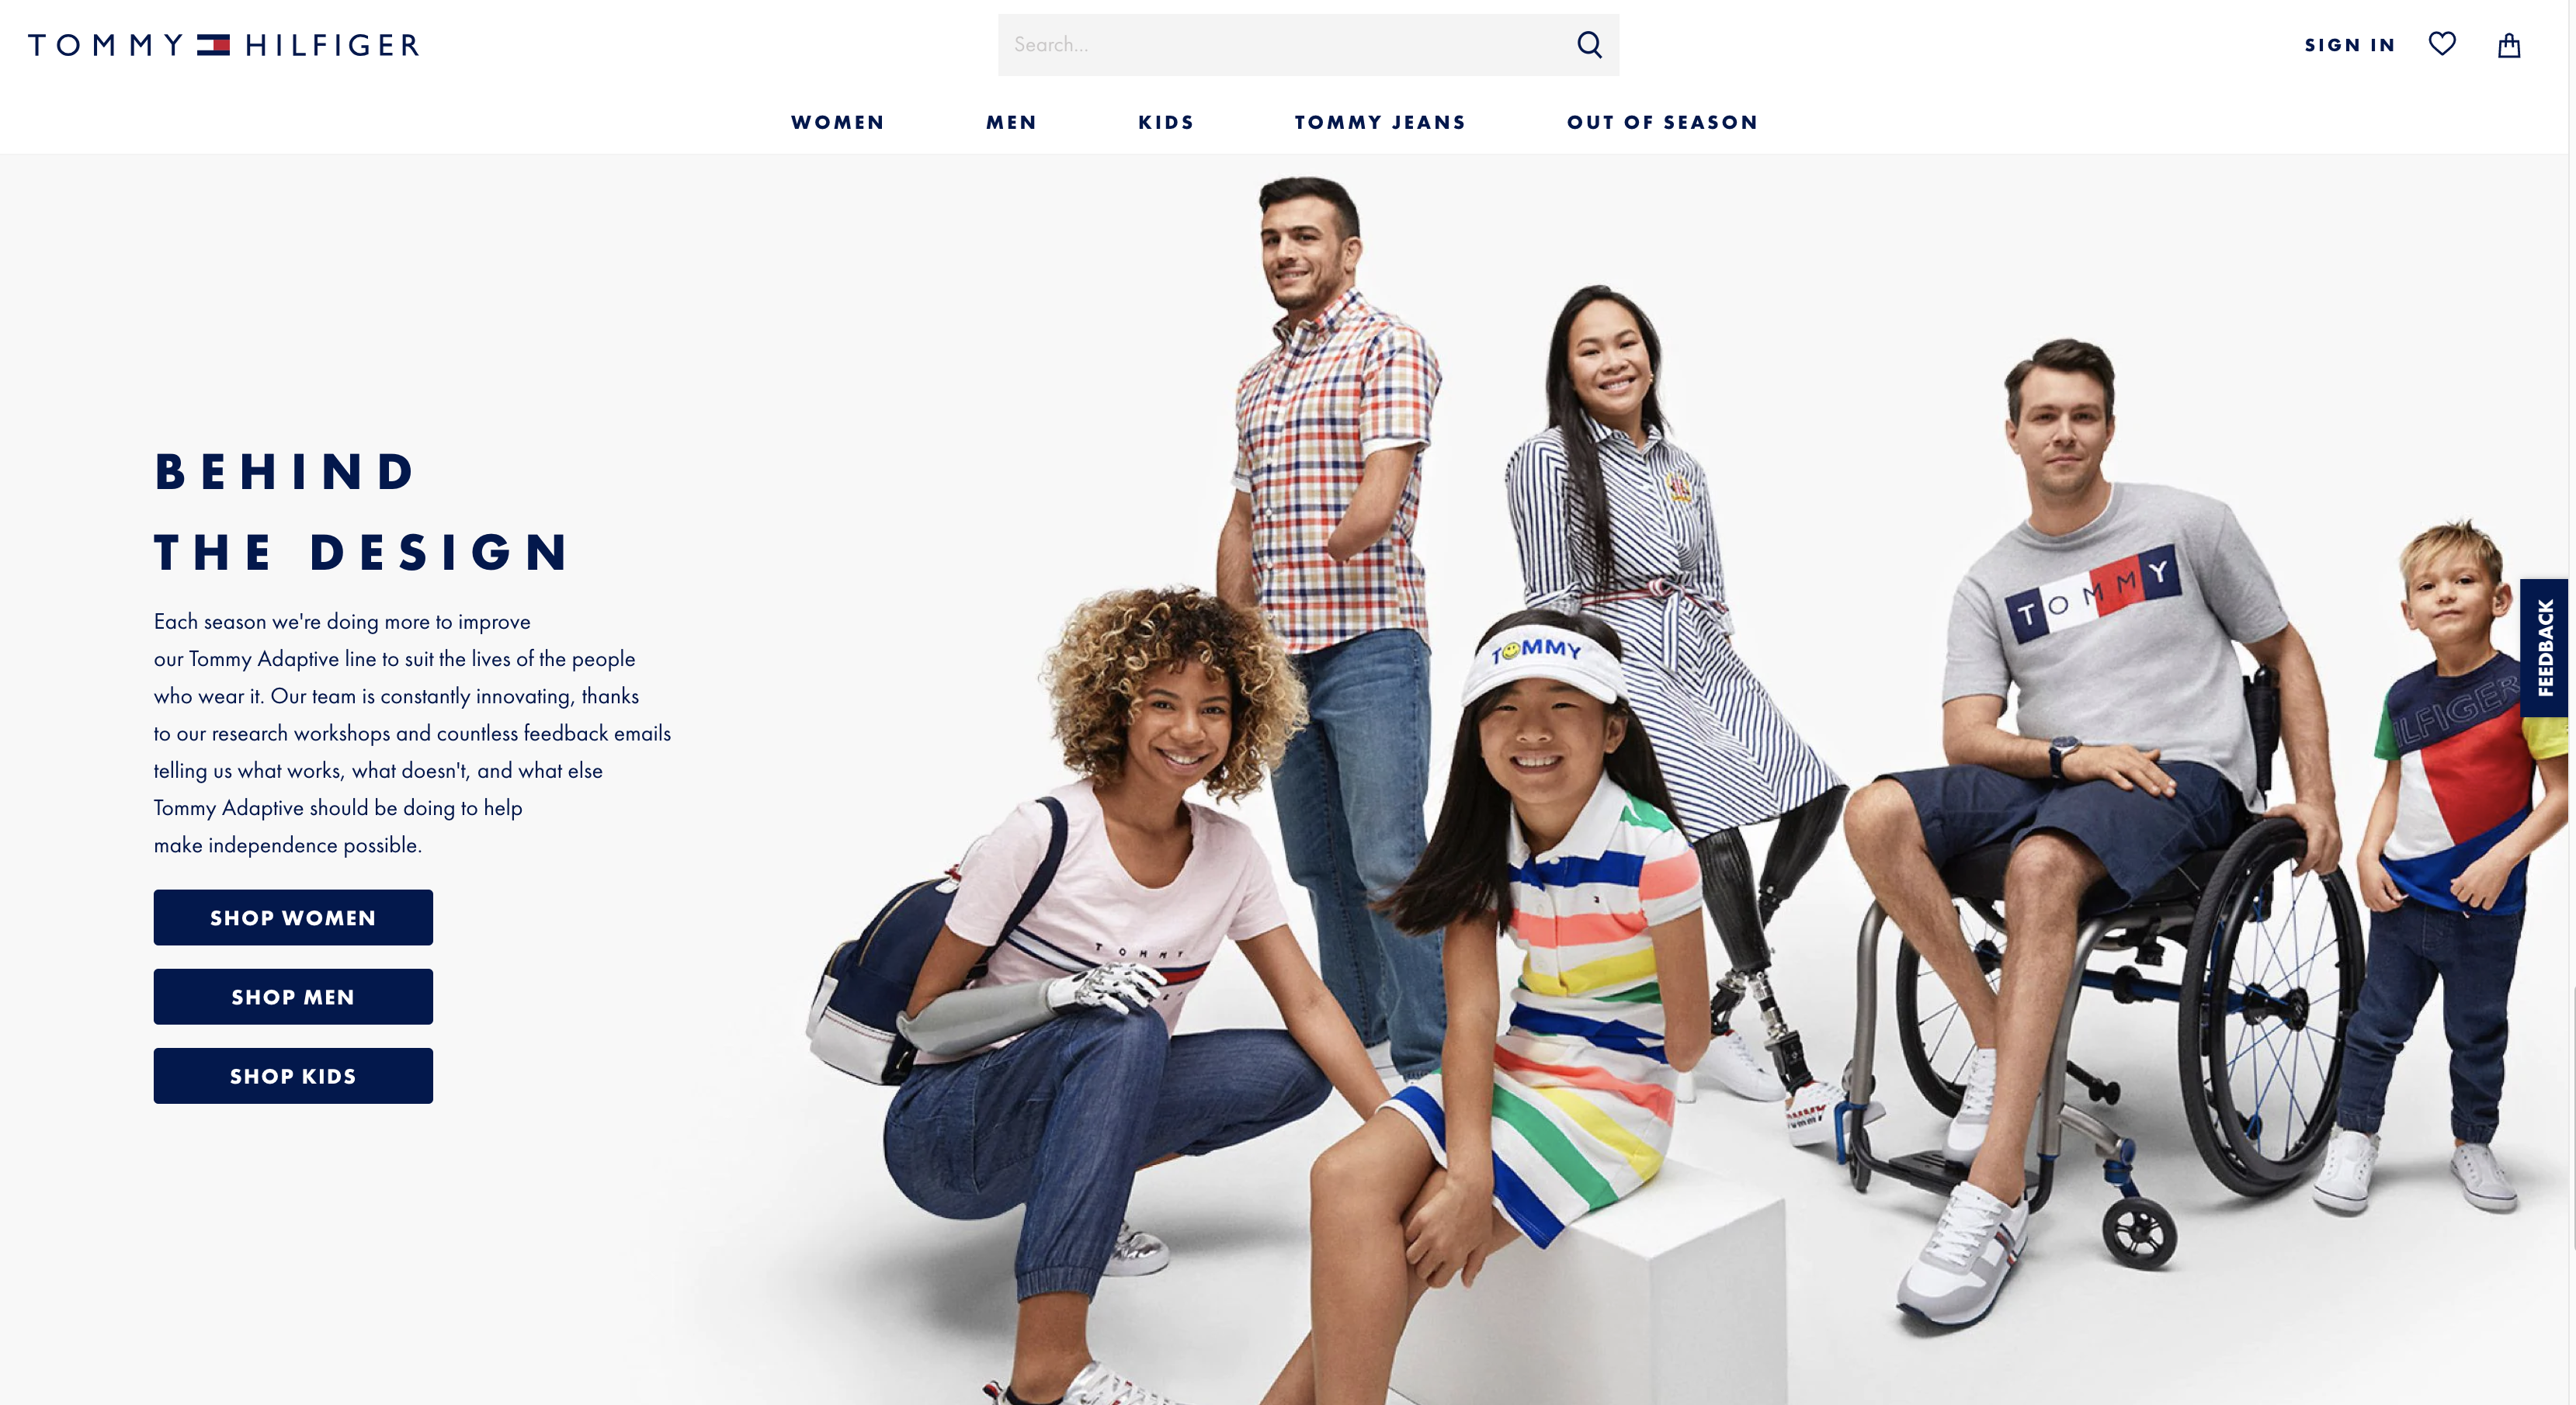 Image shows the website for the adaptive clothing line for Tommy Hilfiger. The caption reads "behind the design".